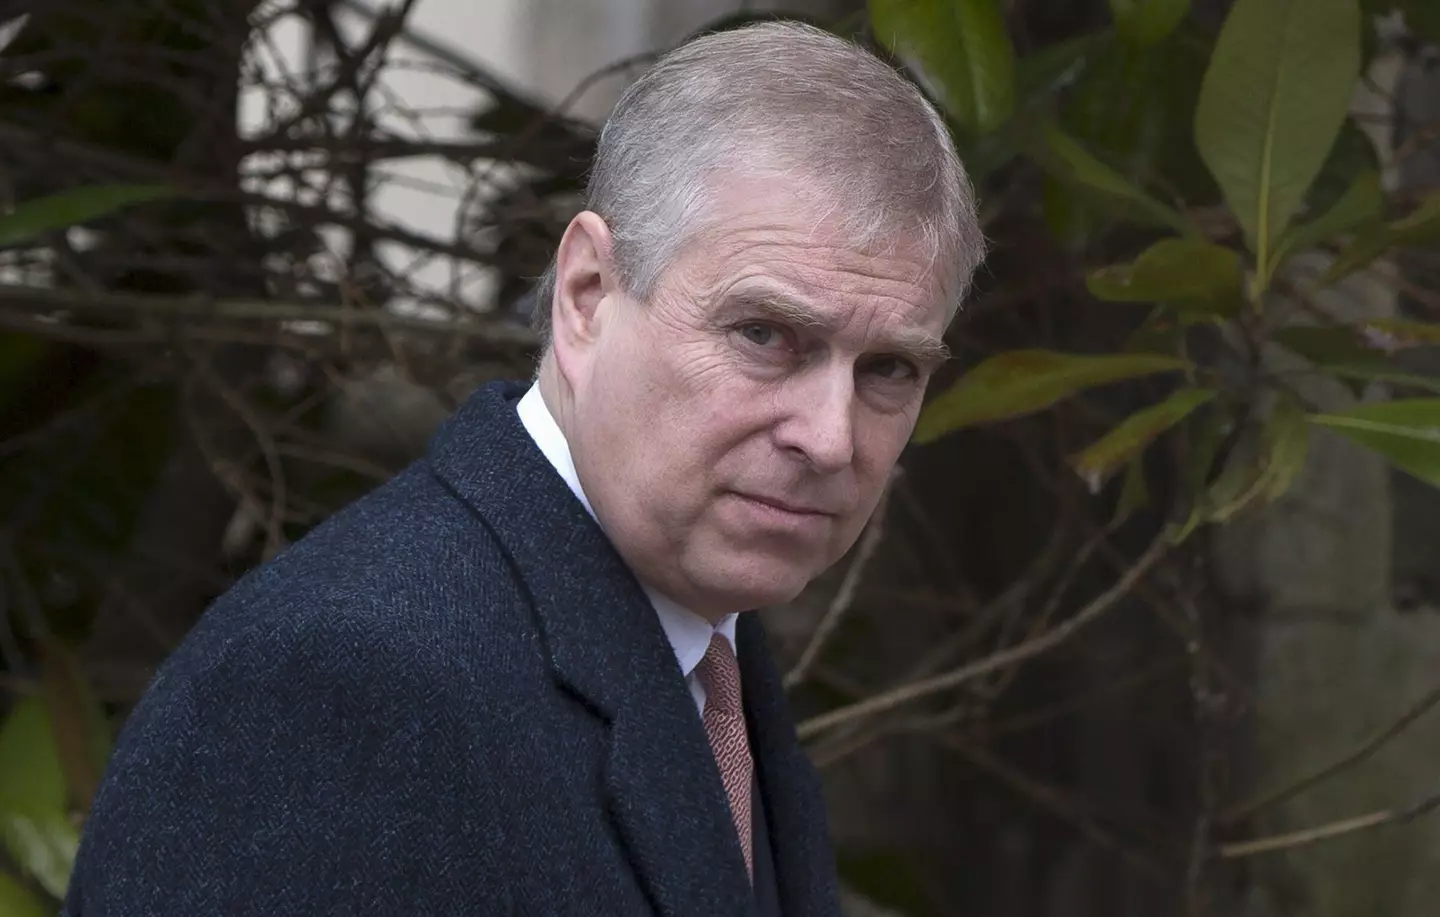 Prince Andrew denies all charges (